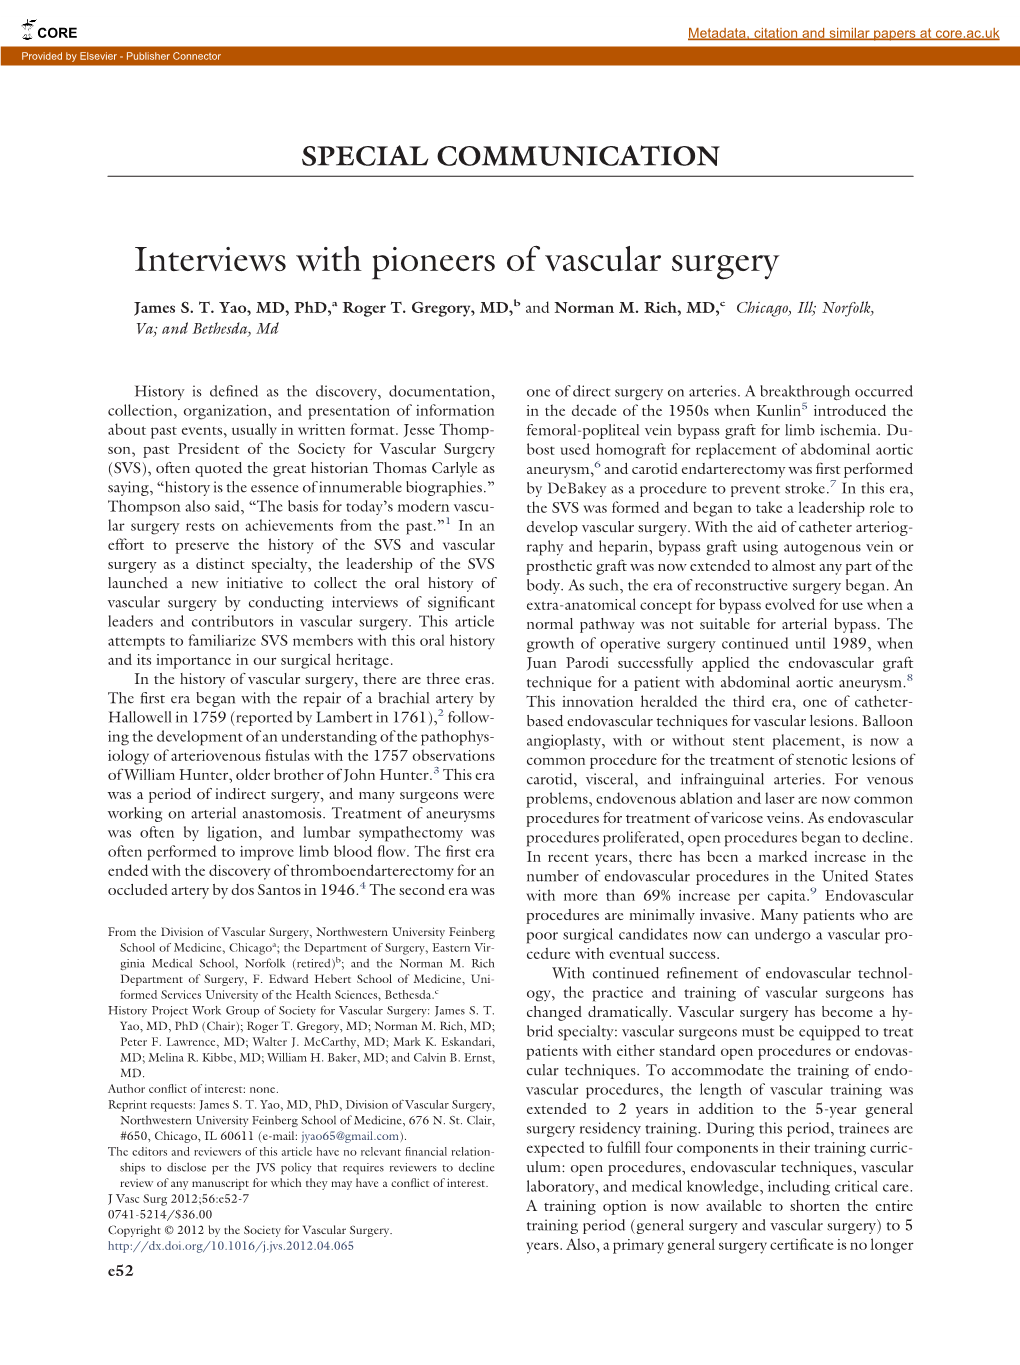 Interviews with Pioneers of Vascular Surgery